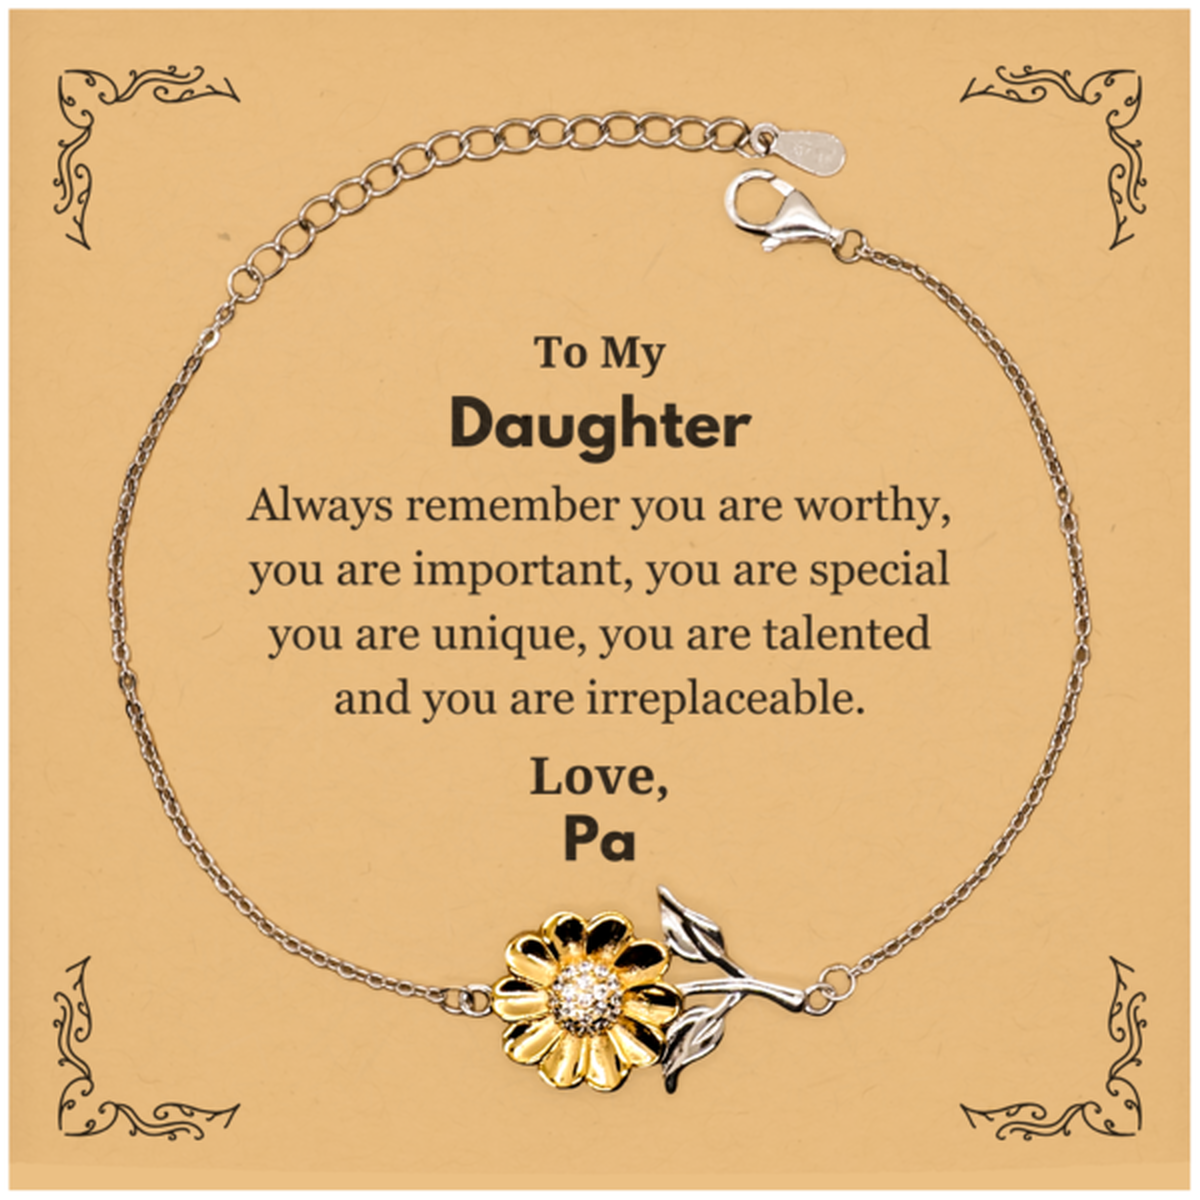 Daughter Birthday Gifts from Pa, Inspirational Sunflower Bracelet for Daughter Christmas Graduation Gifts for Daughter Always remember you are worthy, you are important. Love, Pa